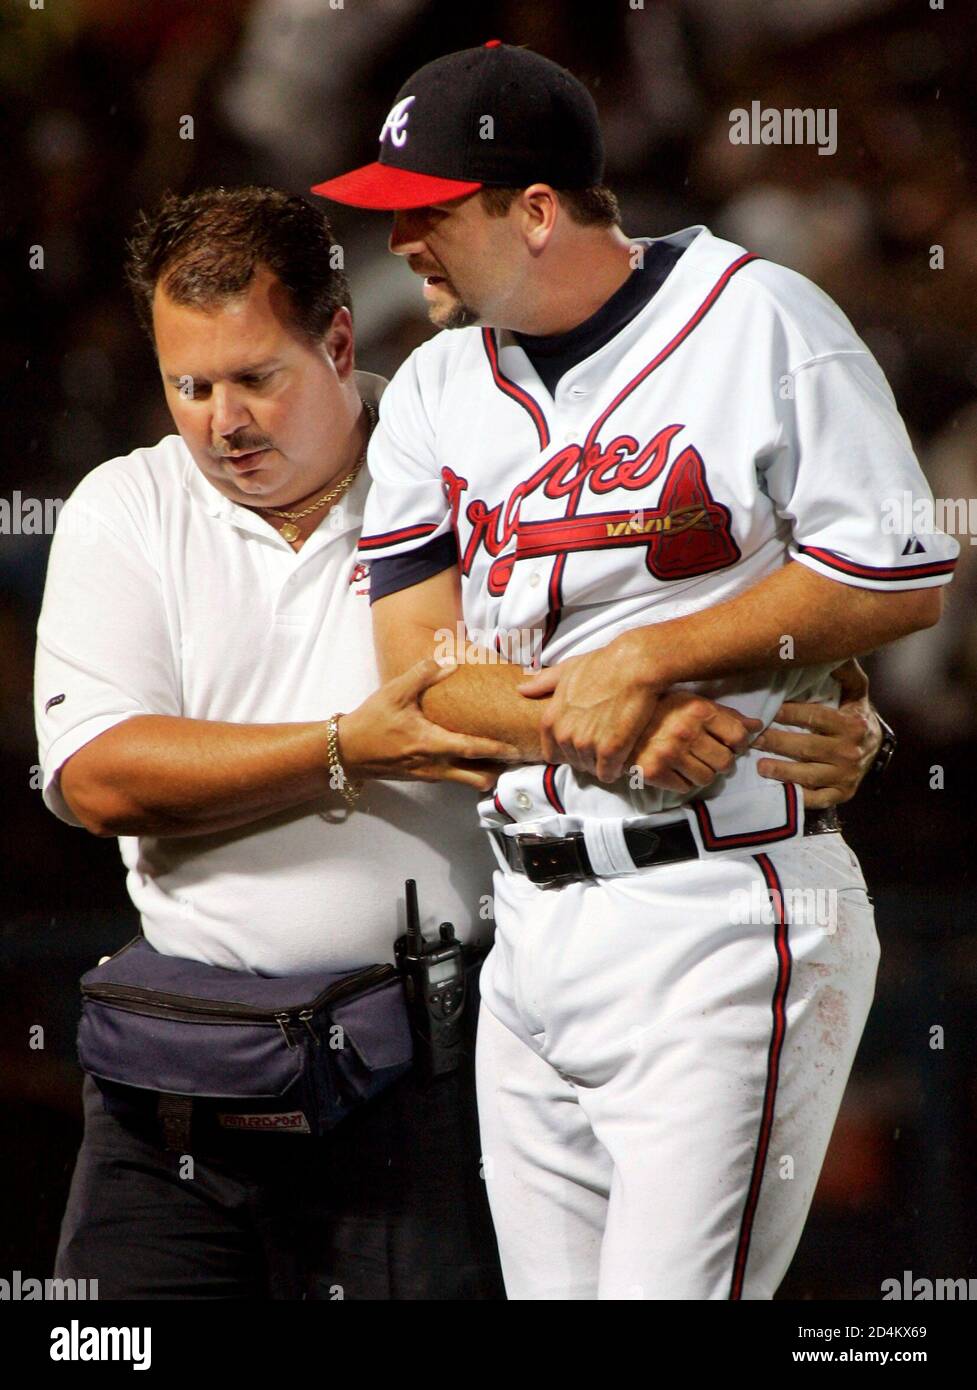 Atlanta Braves relief pitcher Jay Powell (R) is led off the field by a  Braves trainer after injuring his arm while throwing in the ninth inning in  Atlanta, Georgia July 29, 2005.